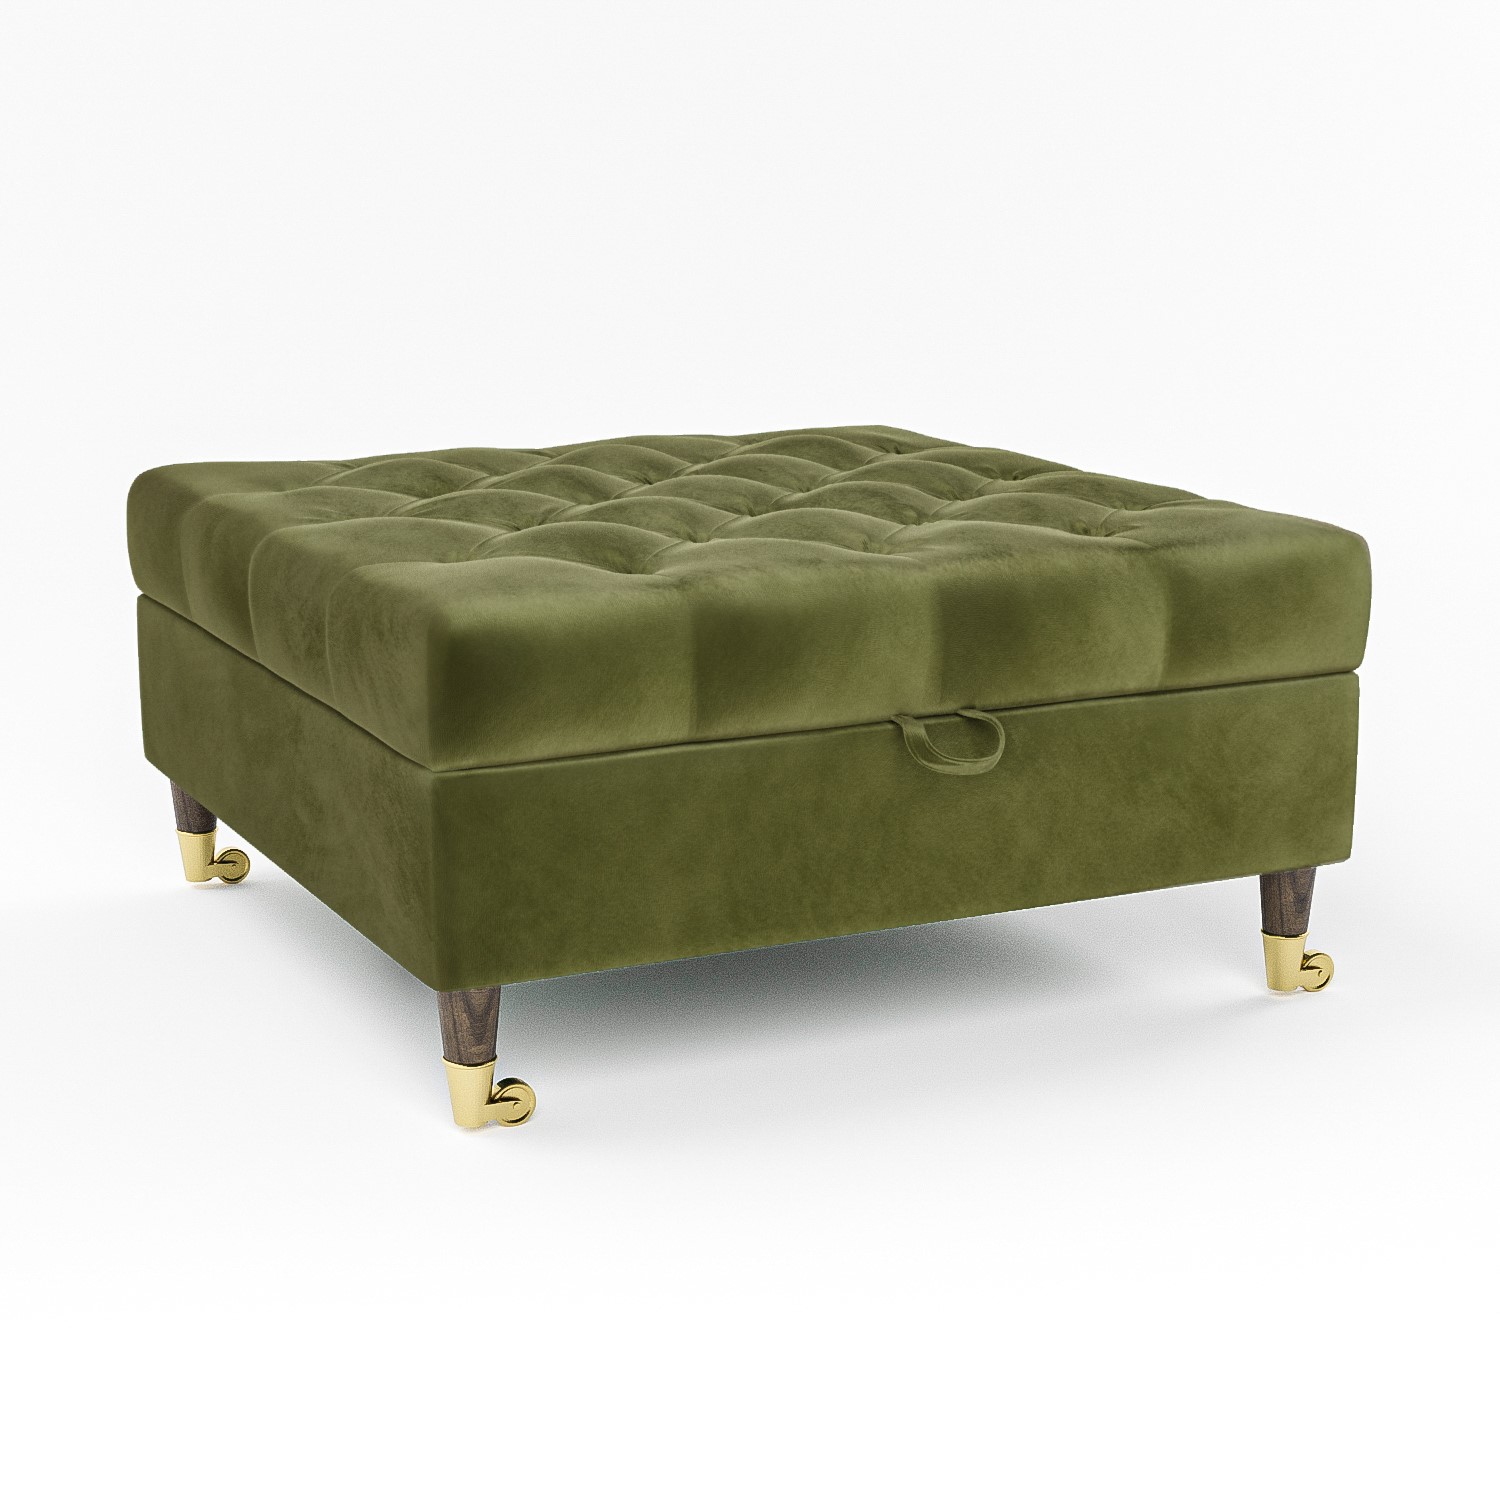 Photo of Large olive green chesterfield footstool with storage & wheels - payton